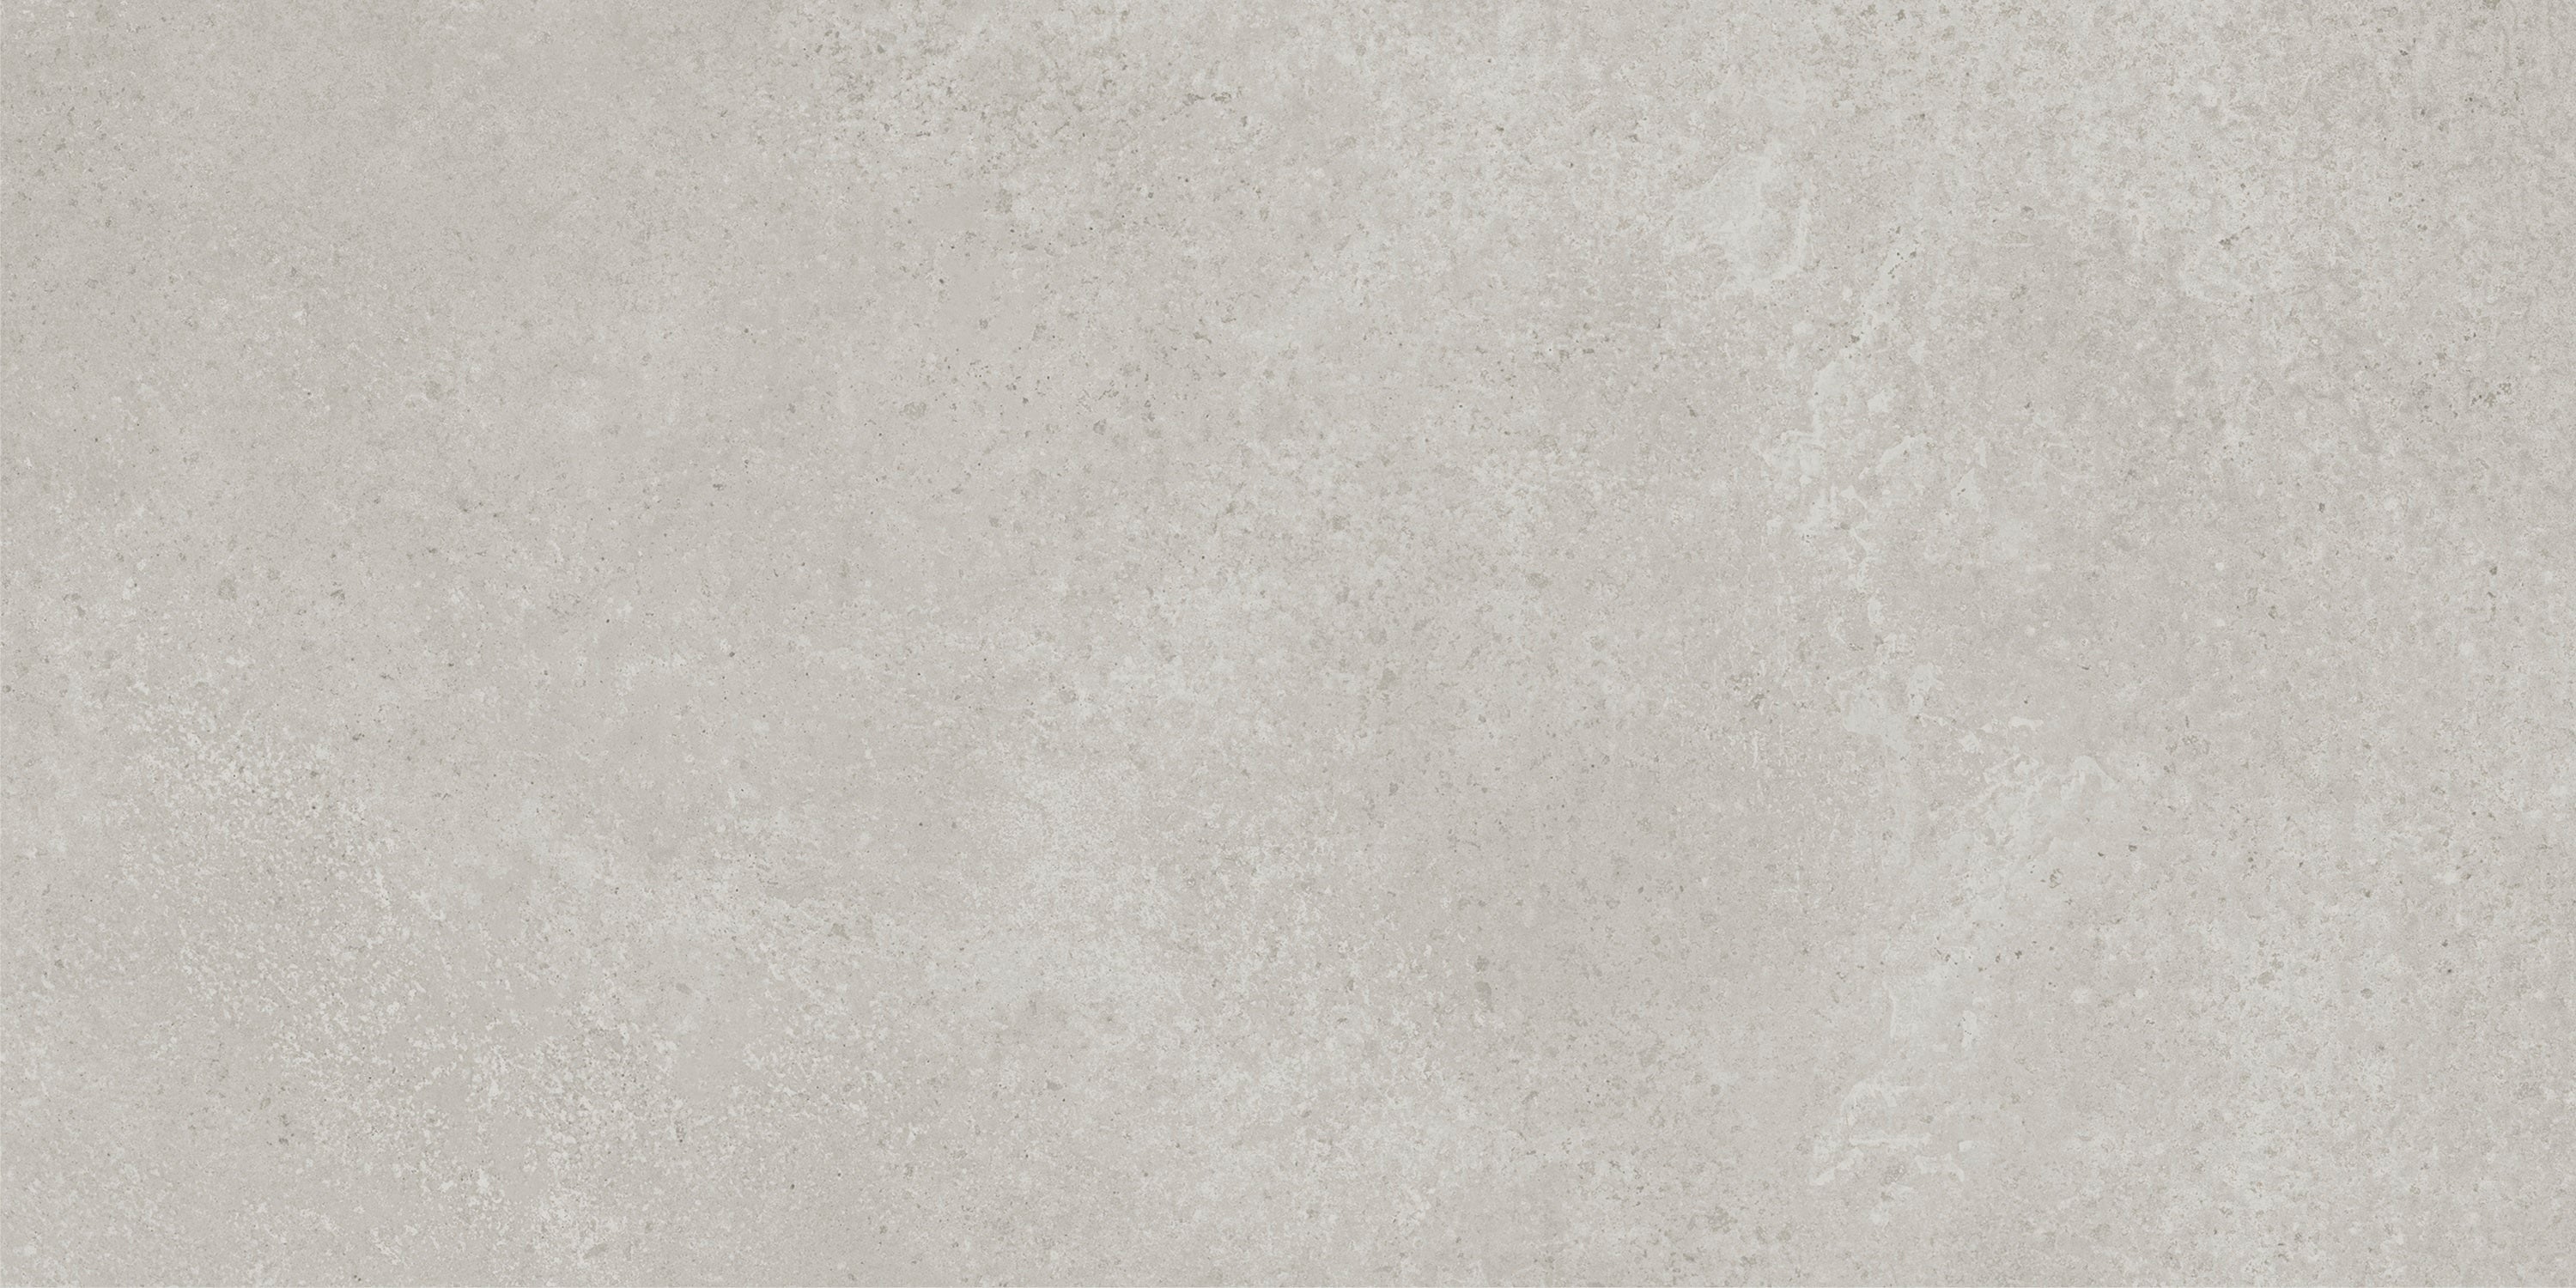 landmark 9mm madein passion silver field tile 12x24x9mm grip rectified porcelain tile distributed by surface group international